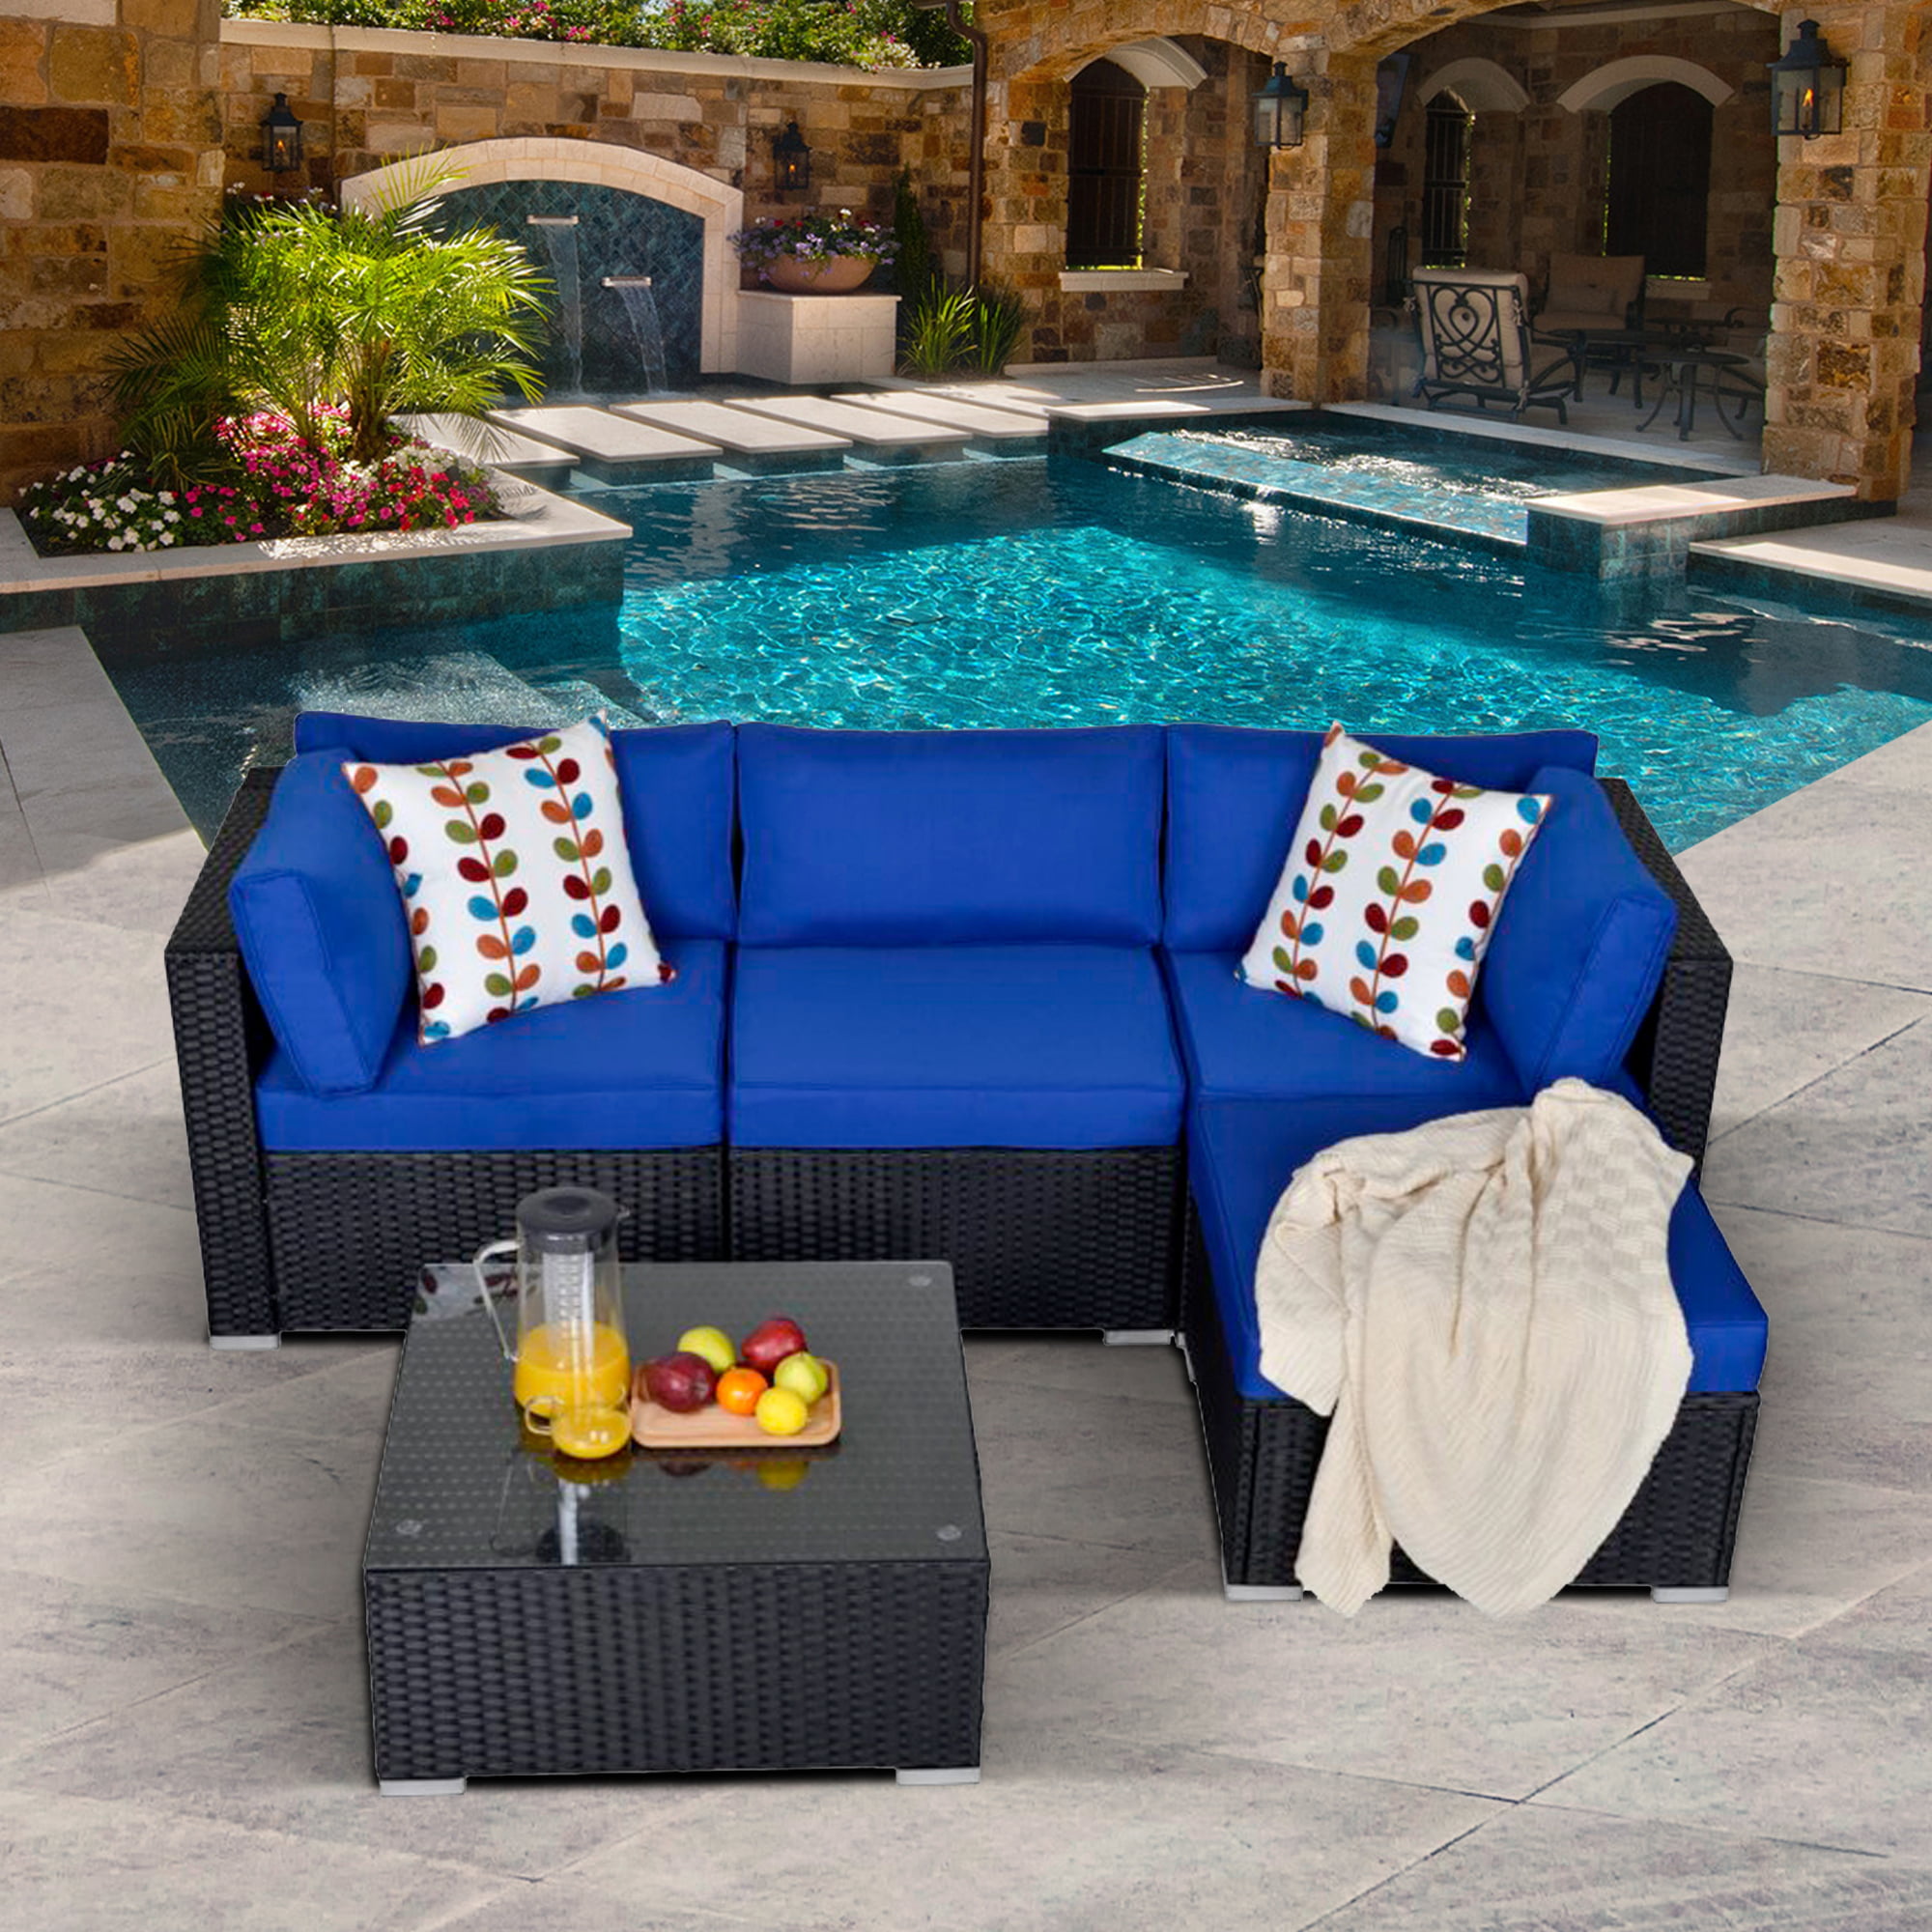 Double, Black/Blue Outdoor Furniture Seating for Backyard Garden Porch Patio Sectional Sofa Chair with Non Slip Cushion Extra Wicker Single Armless Seat for SUNVIVI OUTDOOR Patio Furniture 